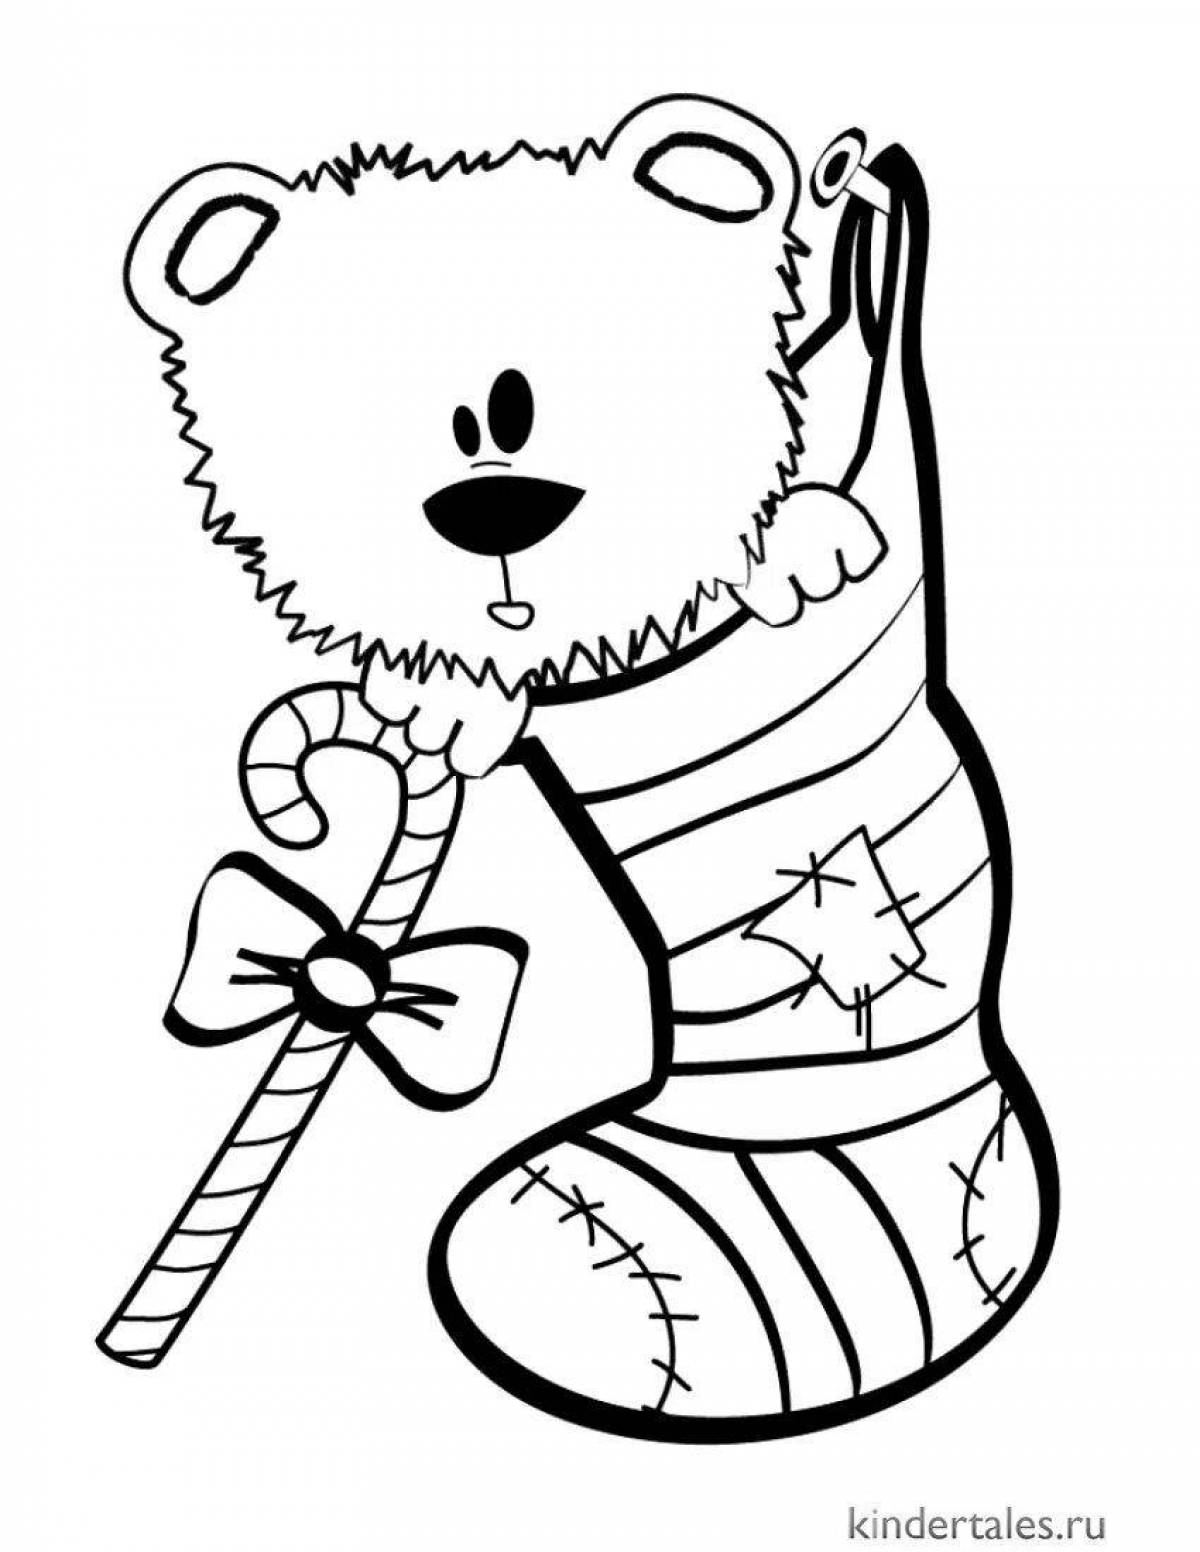 Coloring page wild bear with a gift